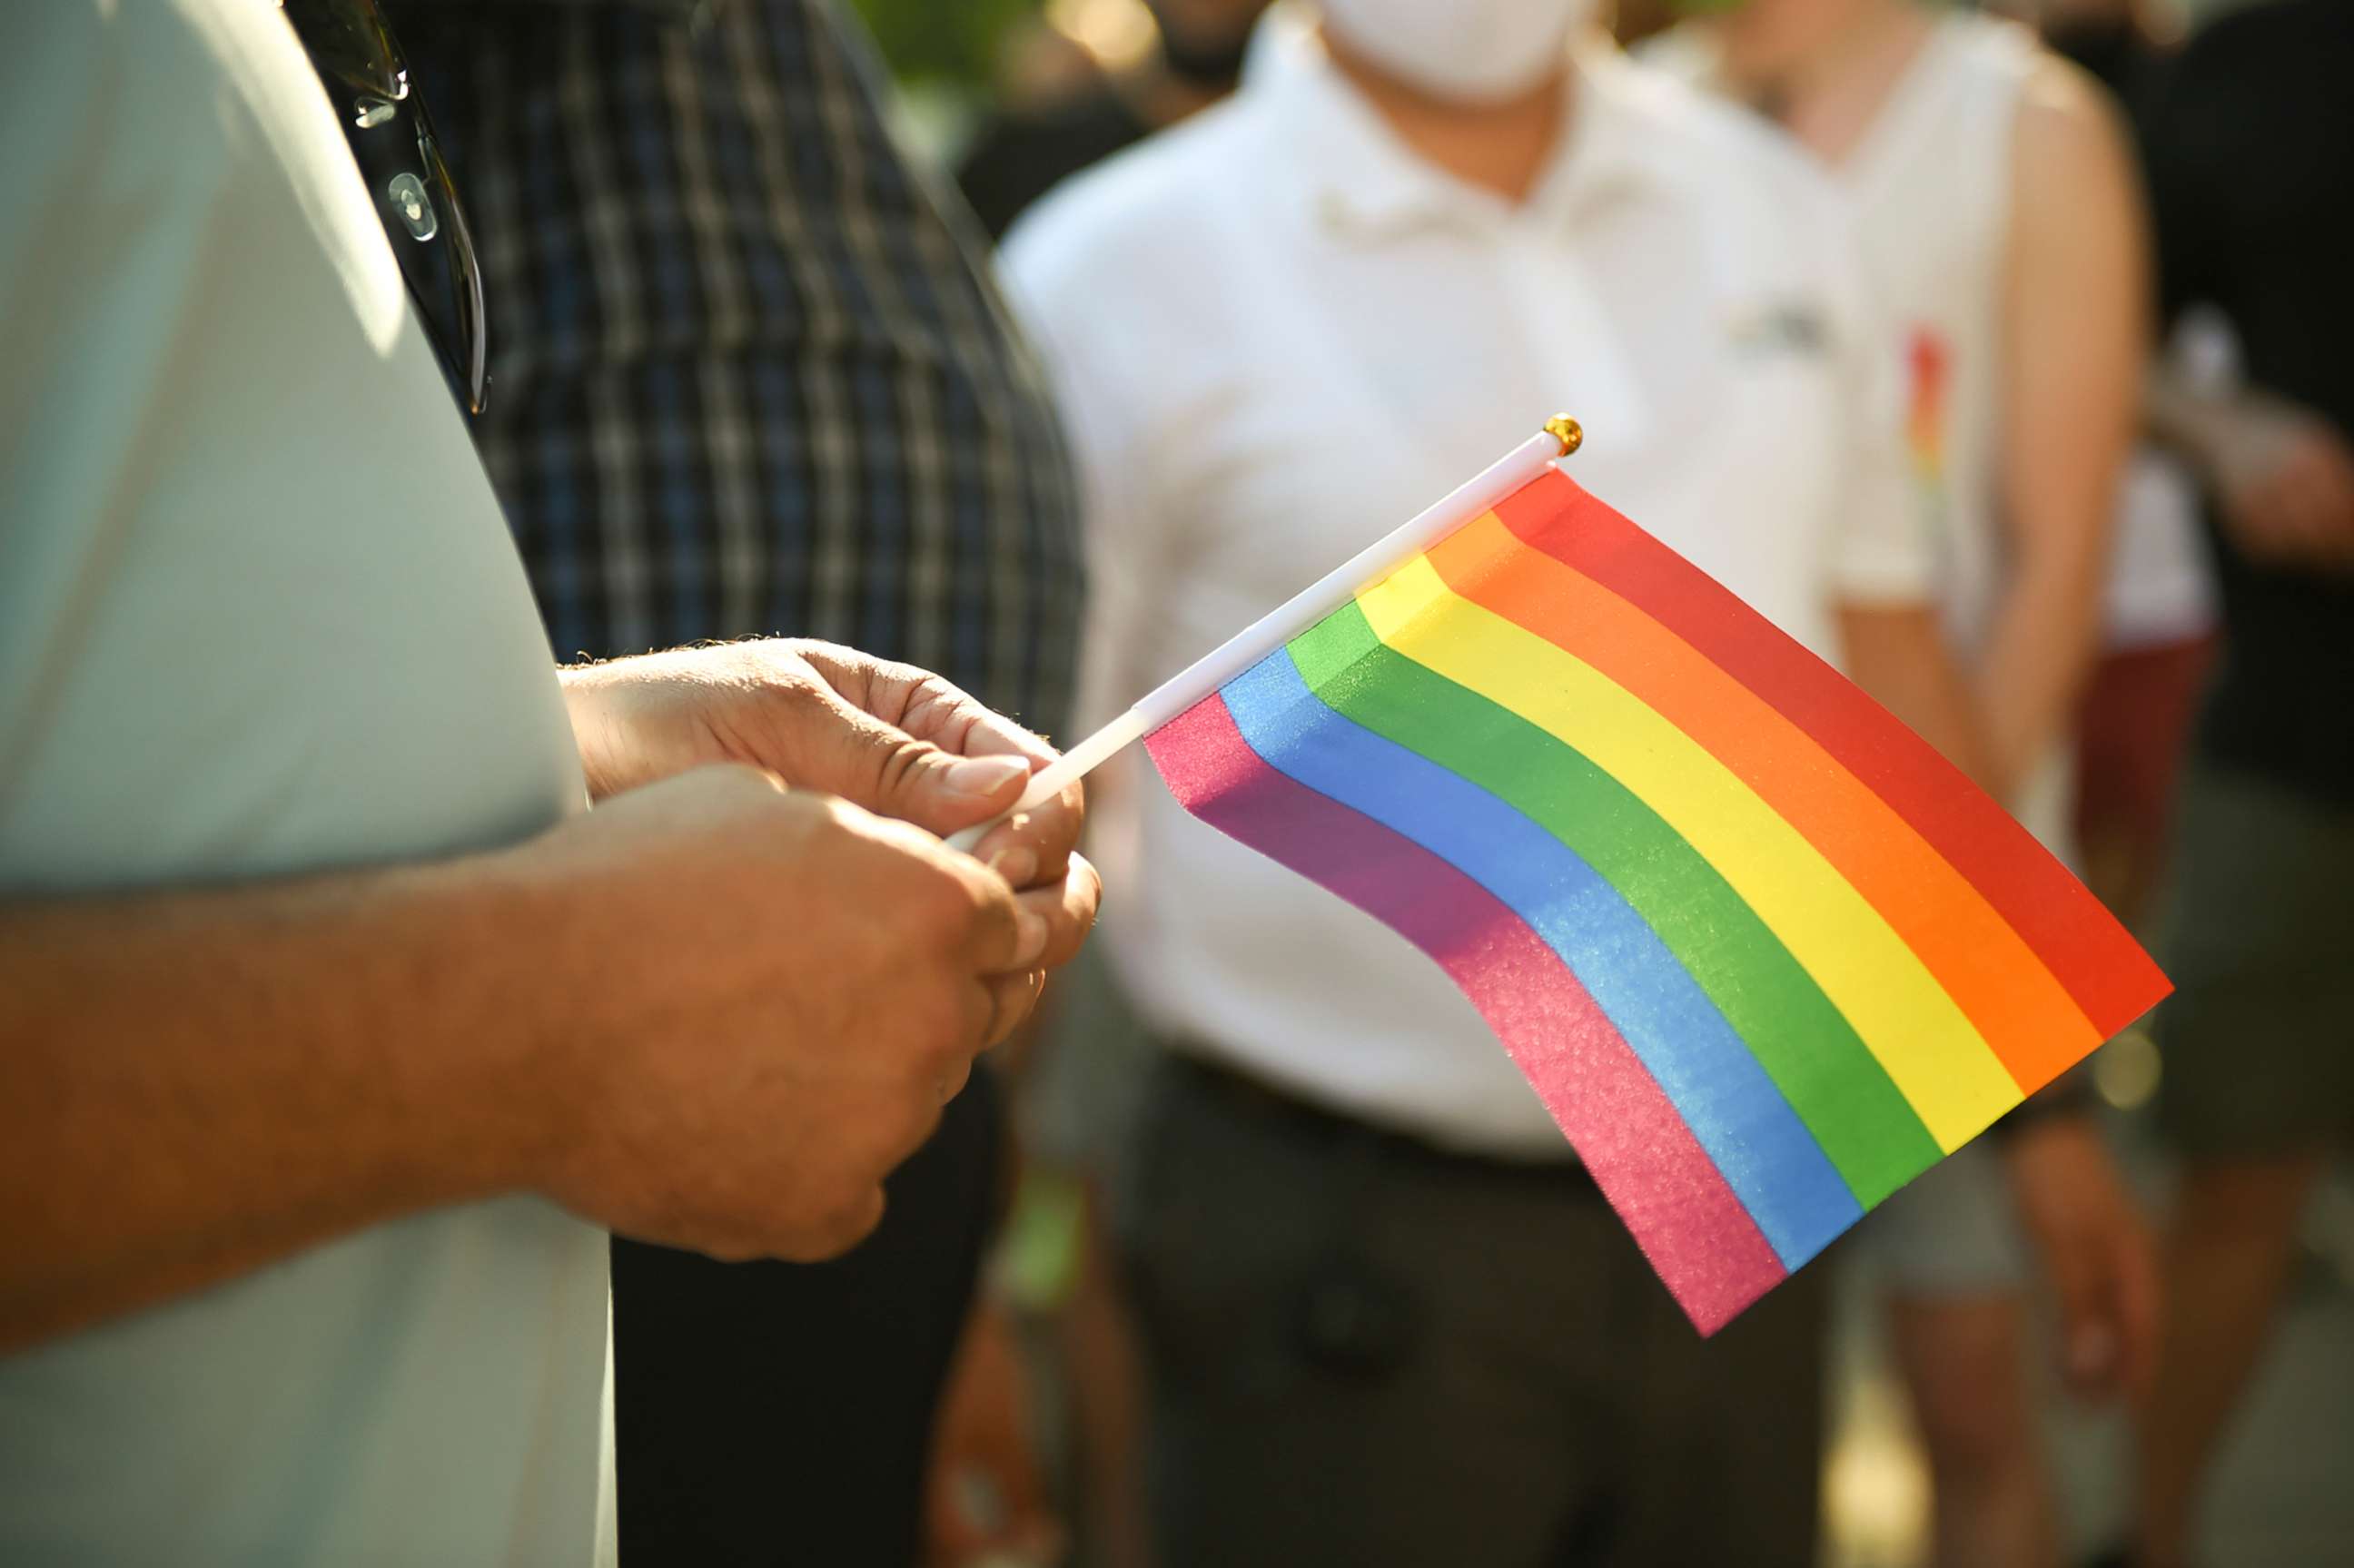 PHOTO: A person holds a Pride flag during a celebration of Pride month in Reading, Pa., June 12, 2020.